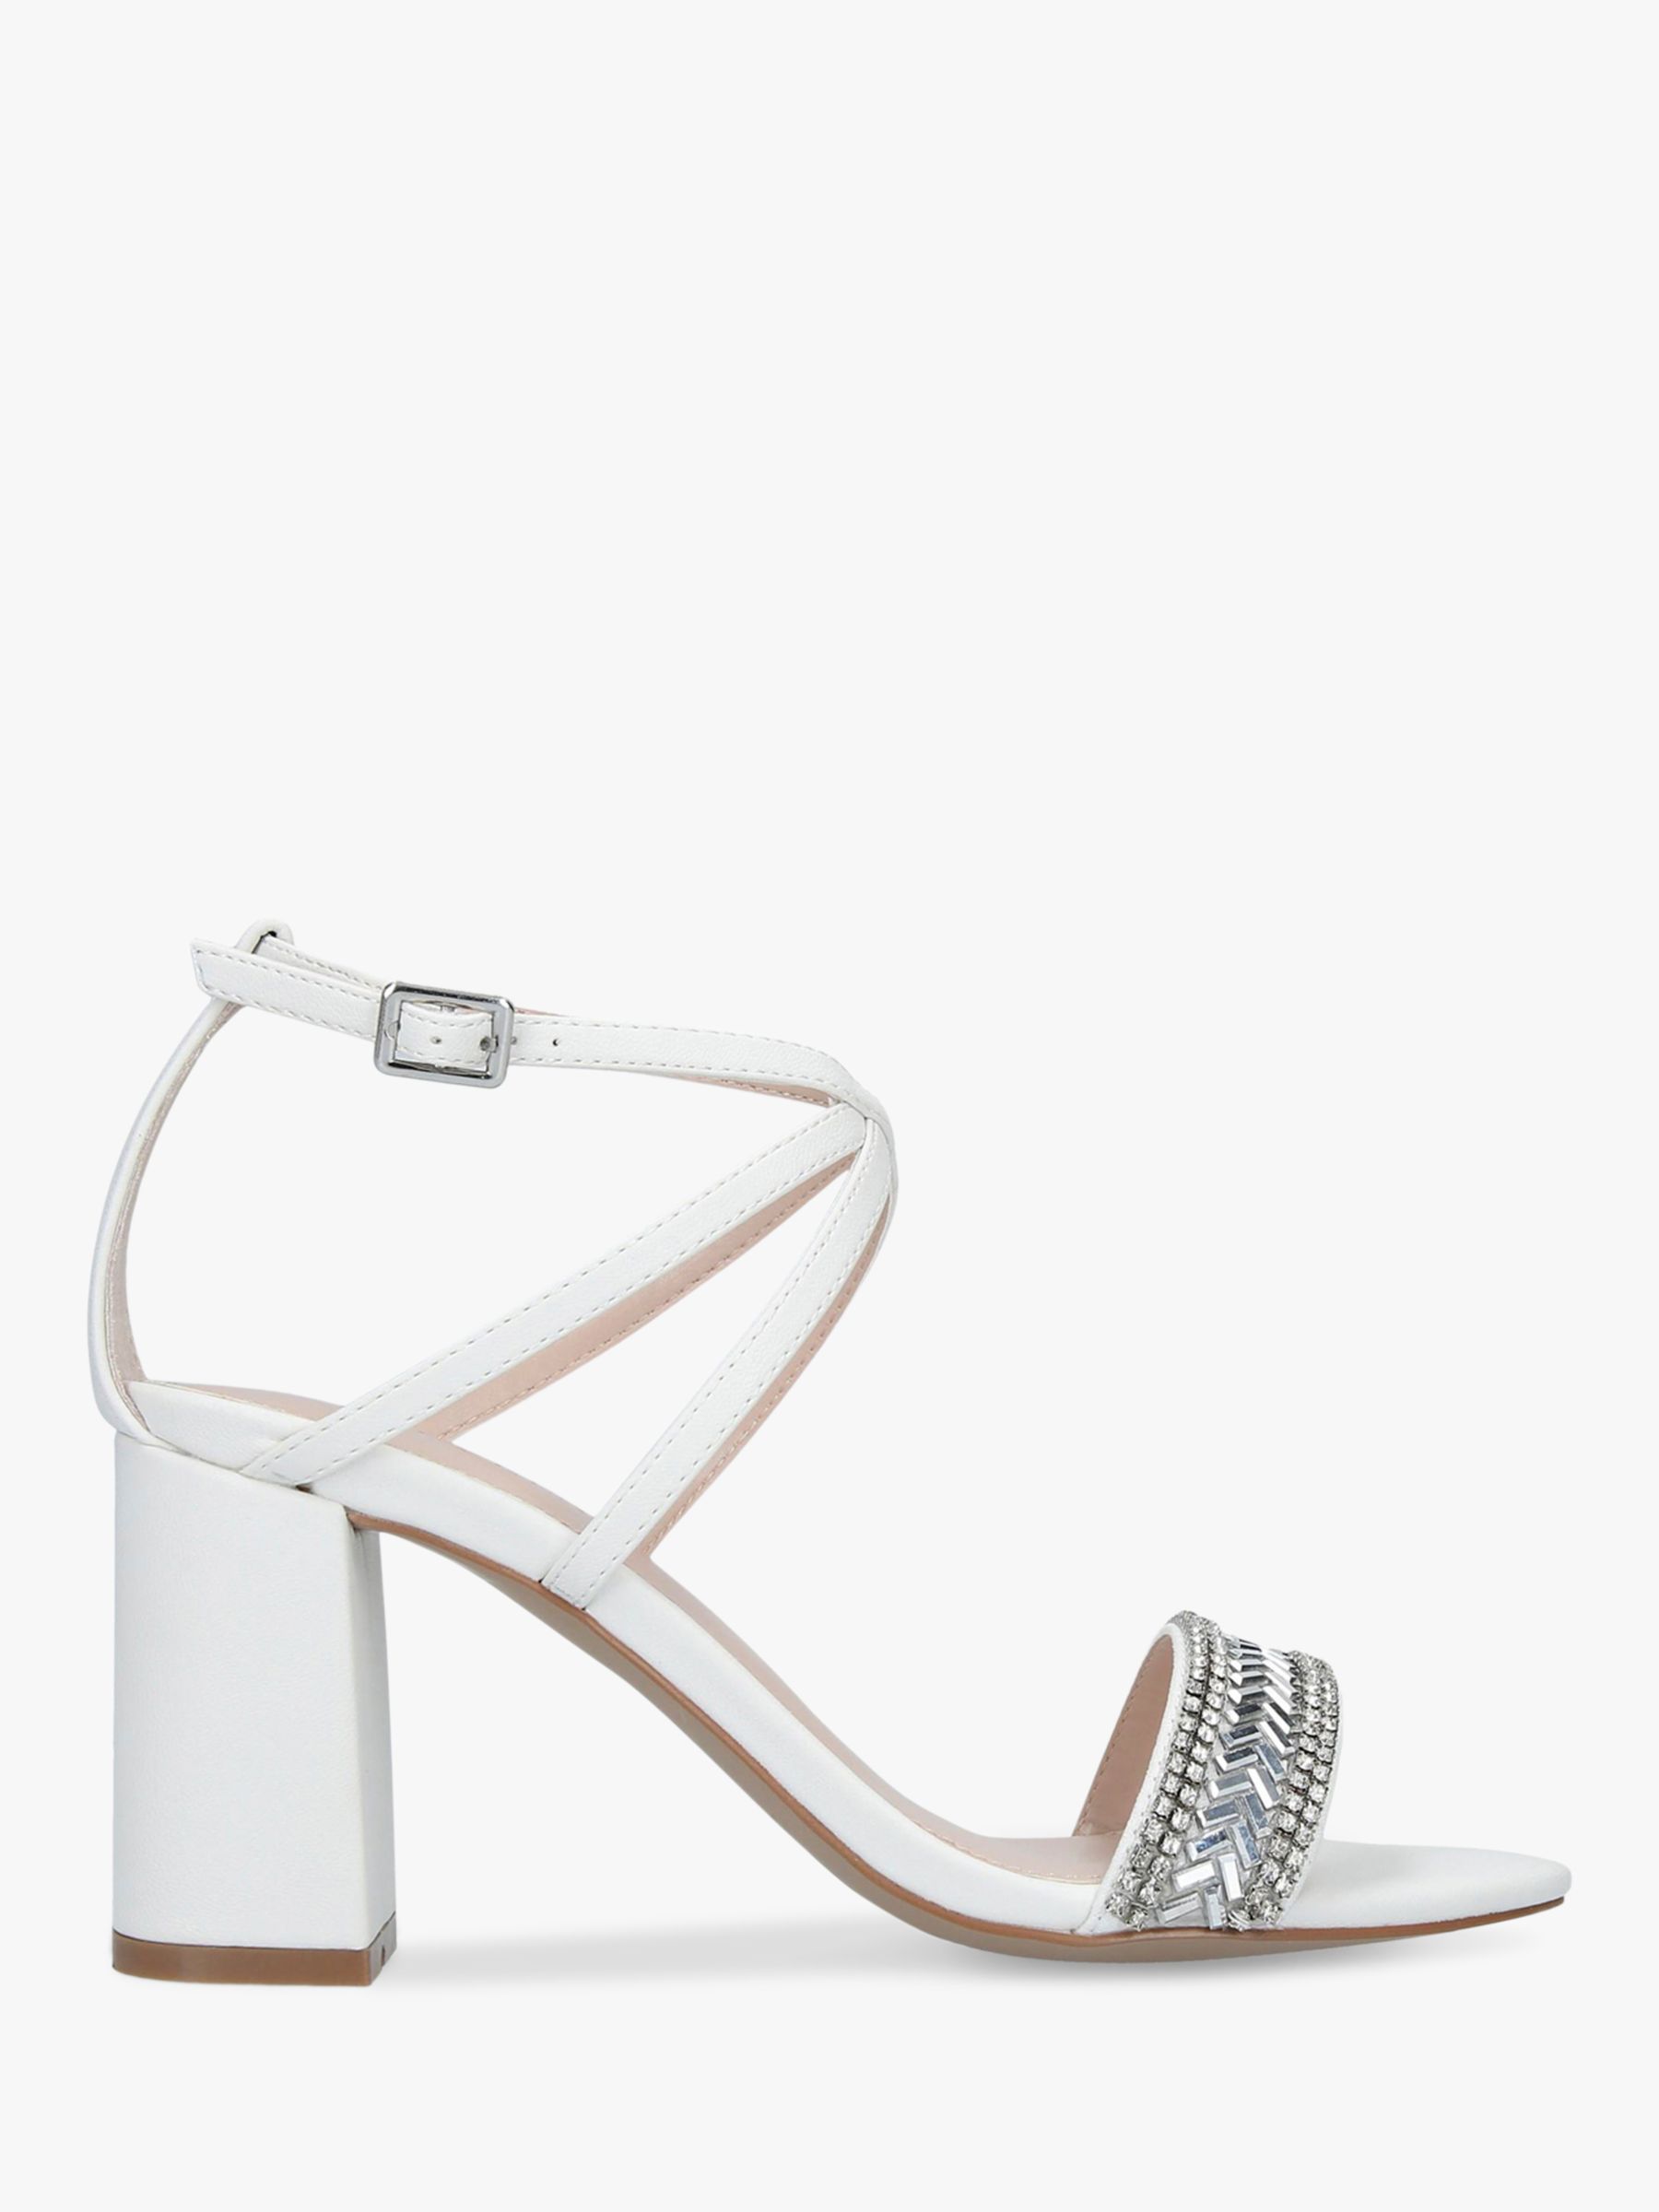 white shoes with block heel